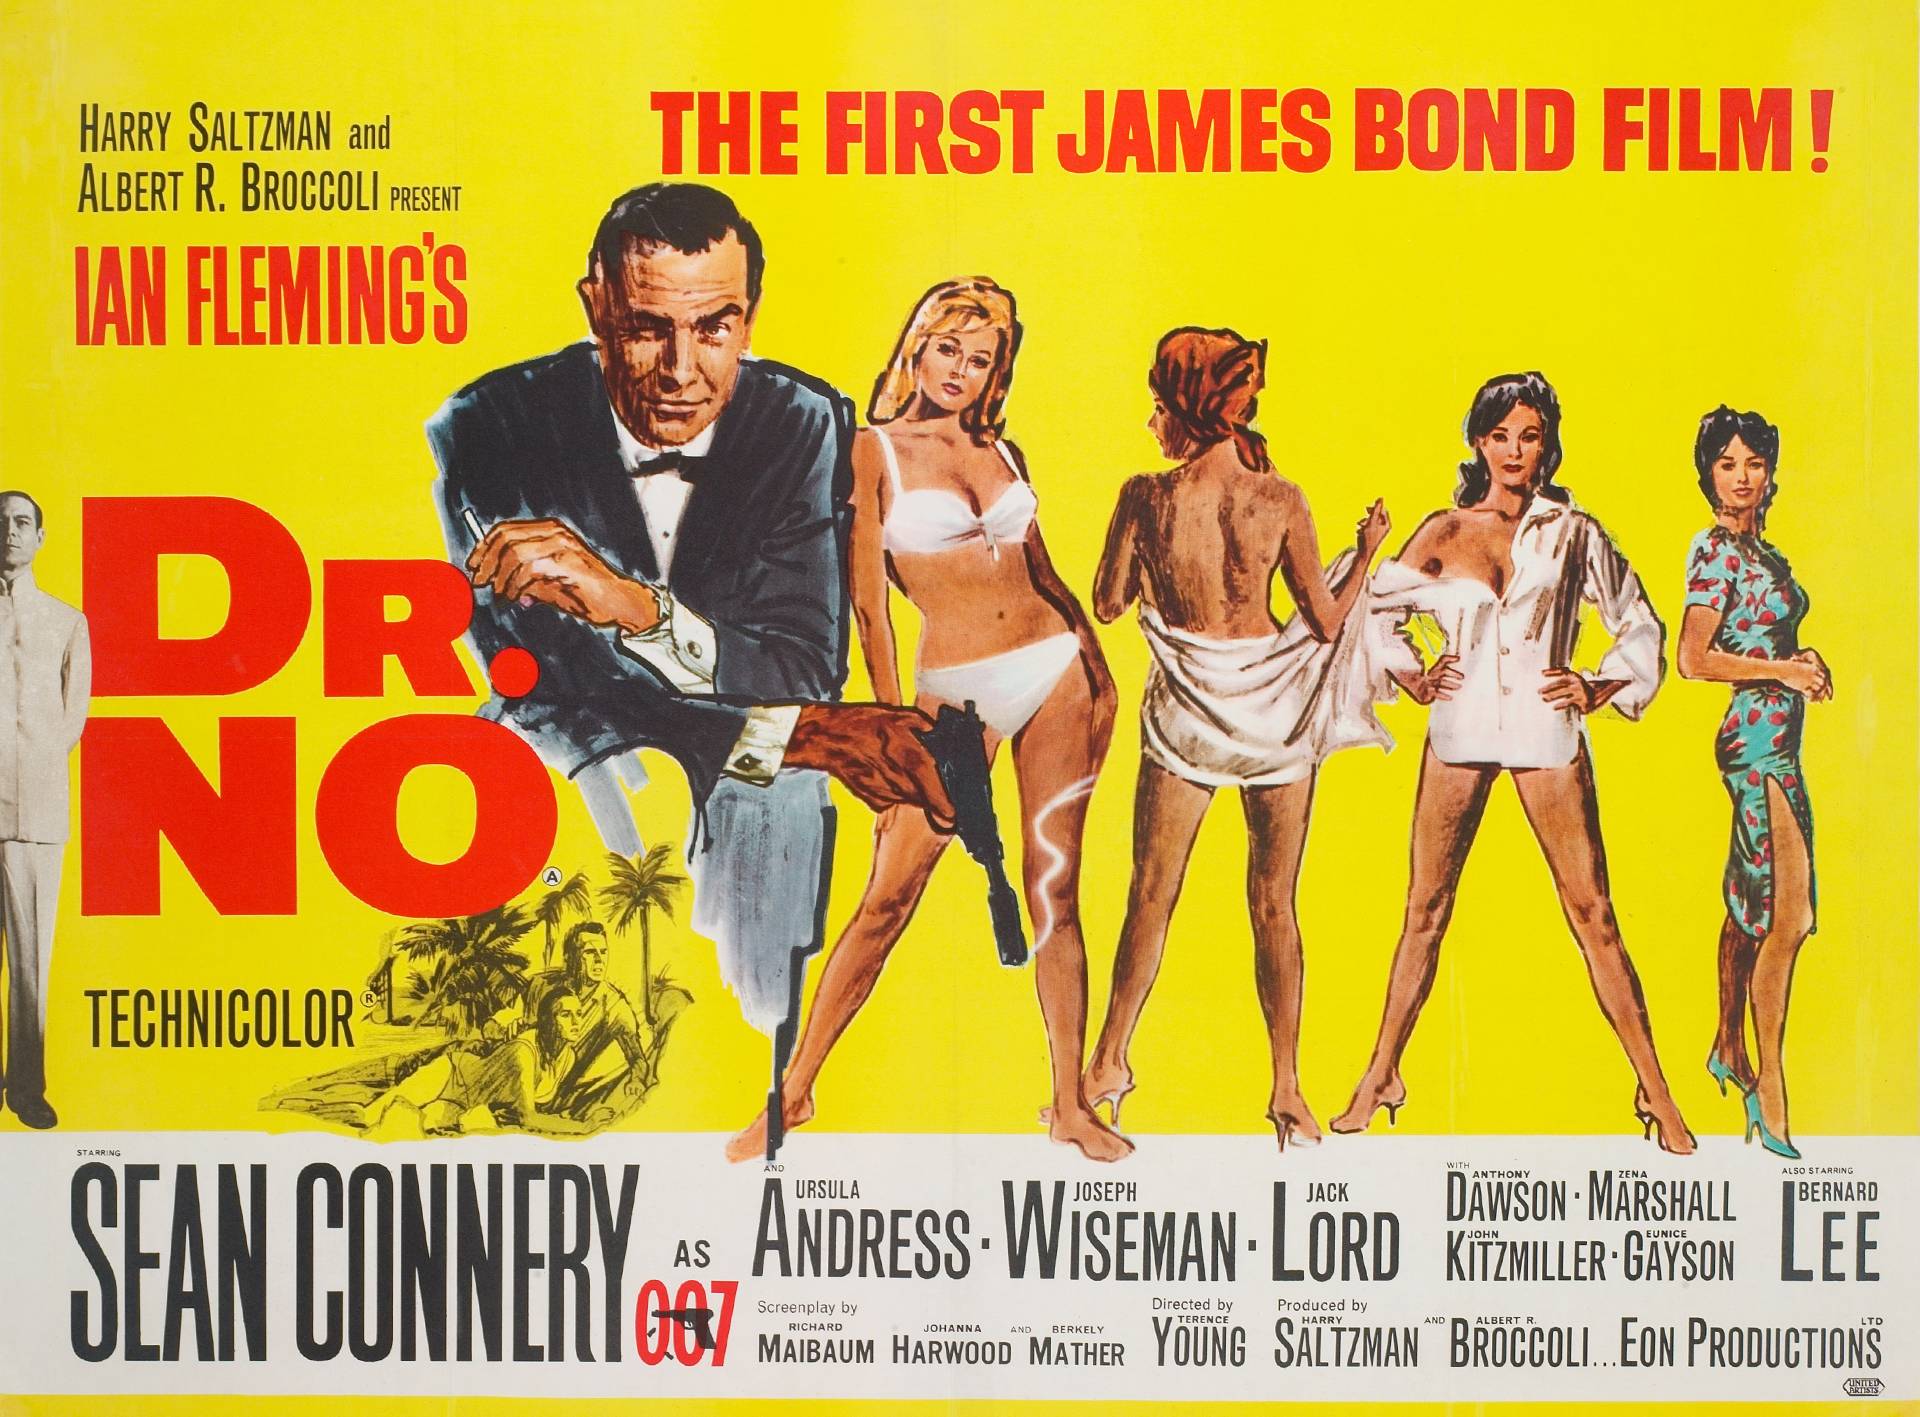 Movie poster for the UK premiere of Dr No on 6 October 1962